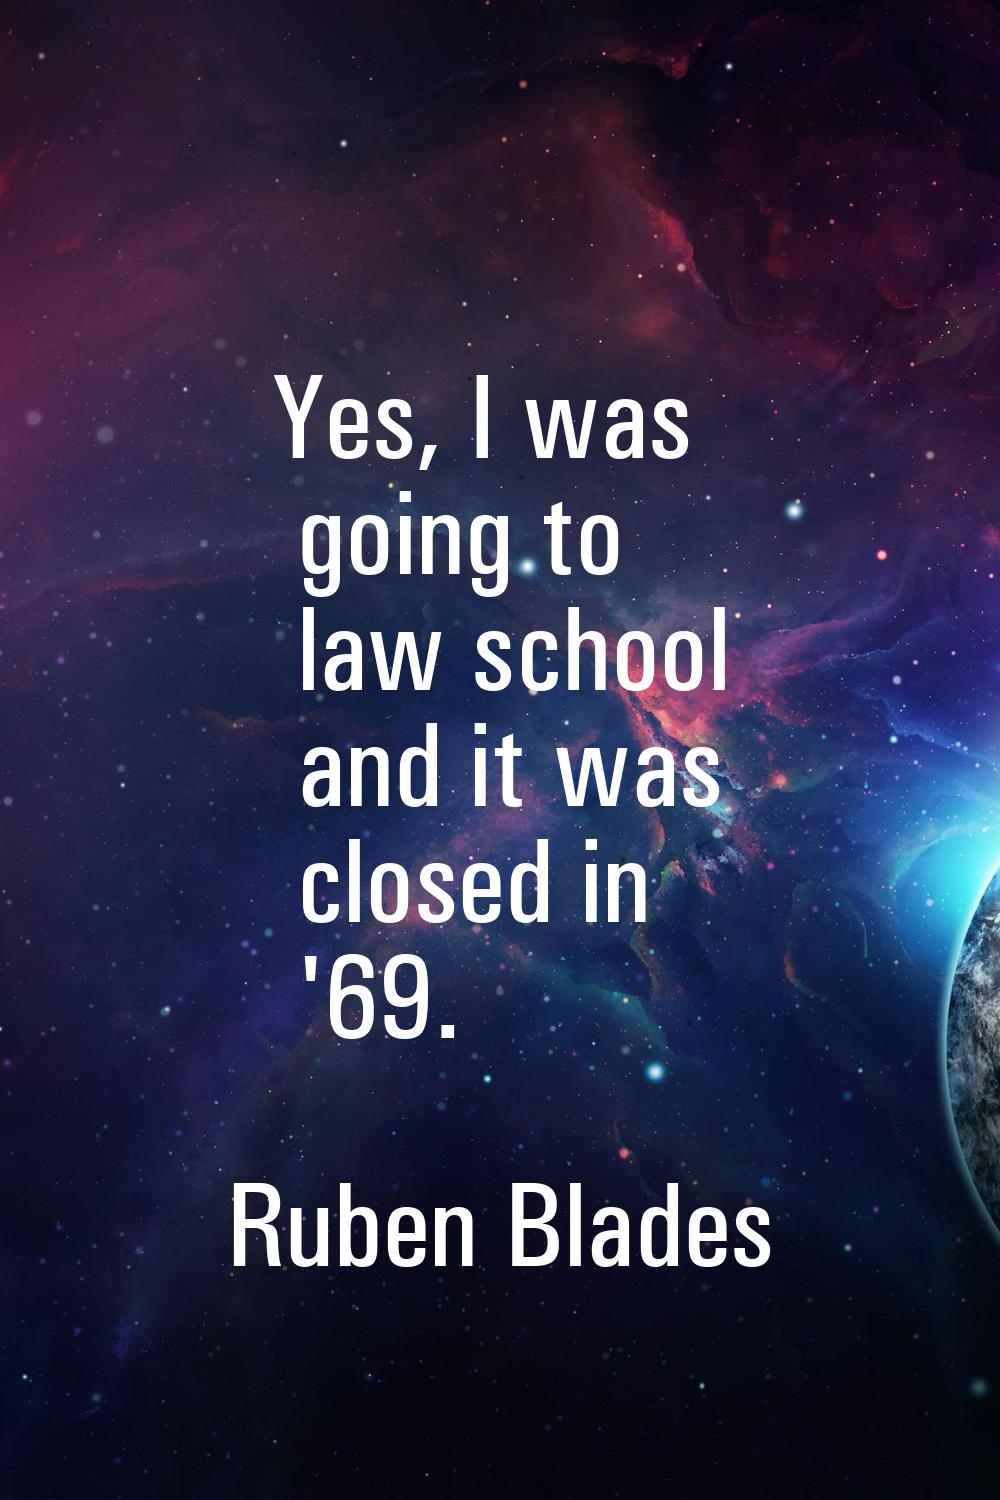 Yes, I was going to law school and it was closed in '69.